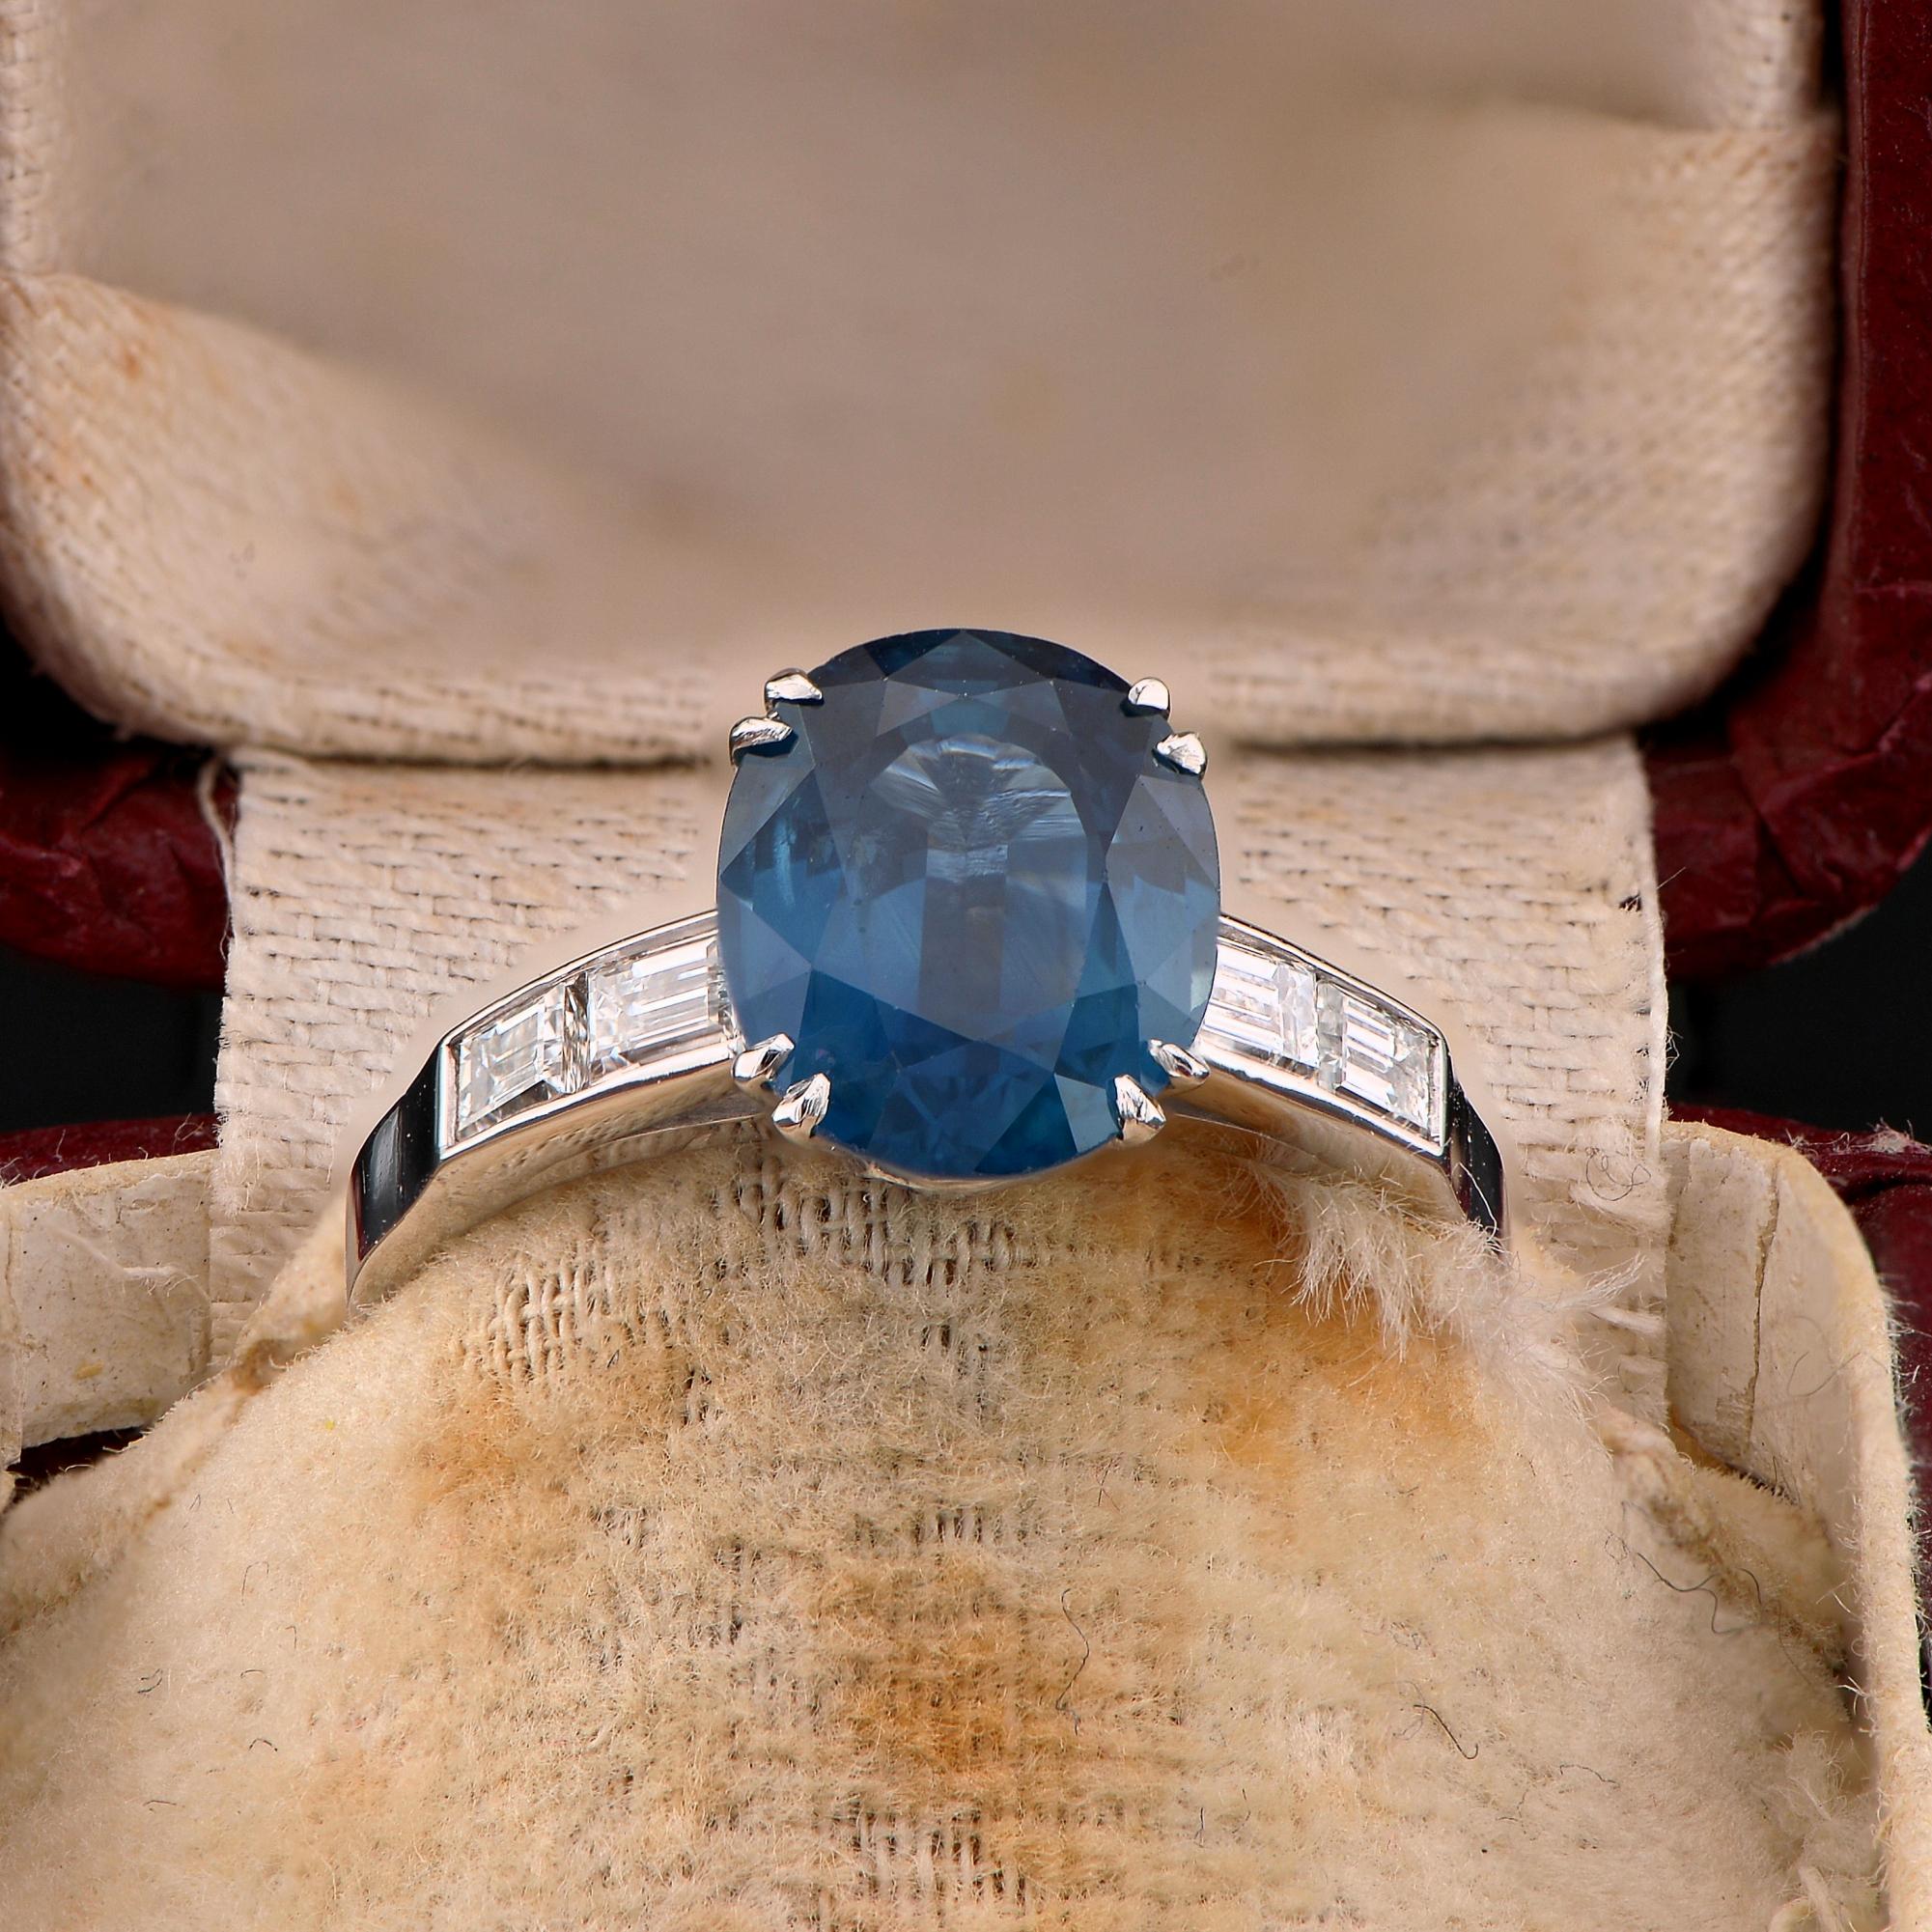 Blue Dream
This sturdy and elegant estate ring is beautifully hand crafted of solid 18 kt gold – marked
Designed as solitaire with an exceptional mounting of timeless style
Imposed in the centre is a totally natural Sapphire is 100% NO Heat –